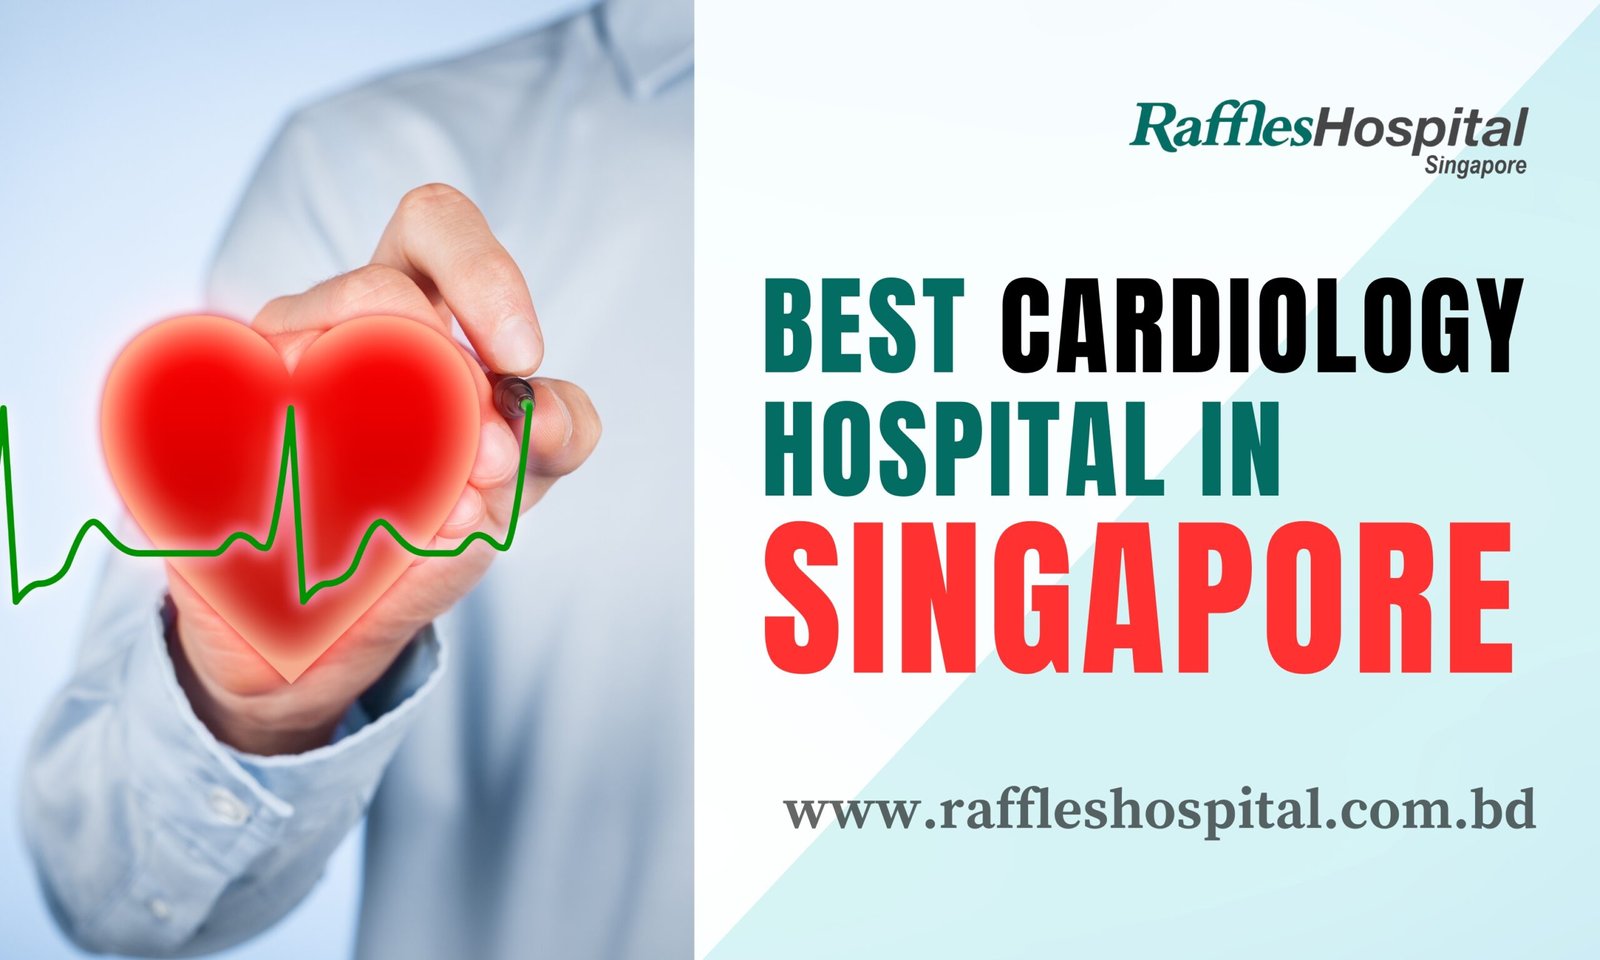 Best Cardiology Hospital in Singapore